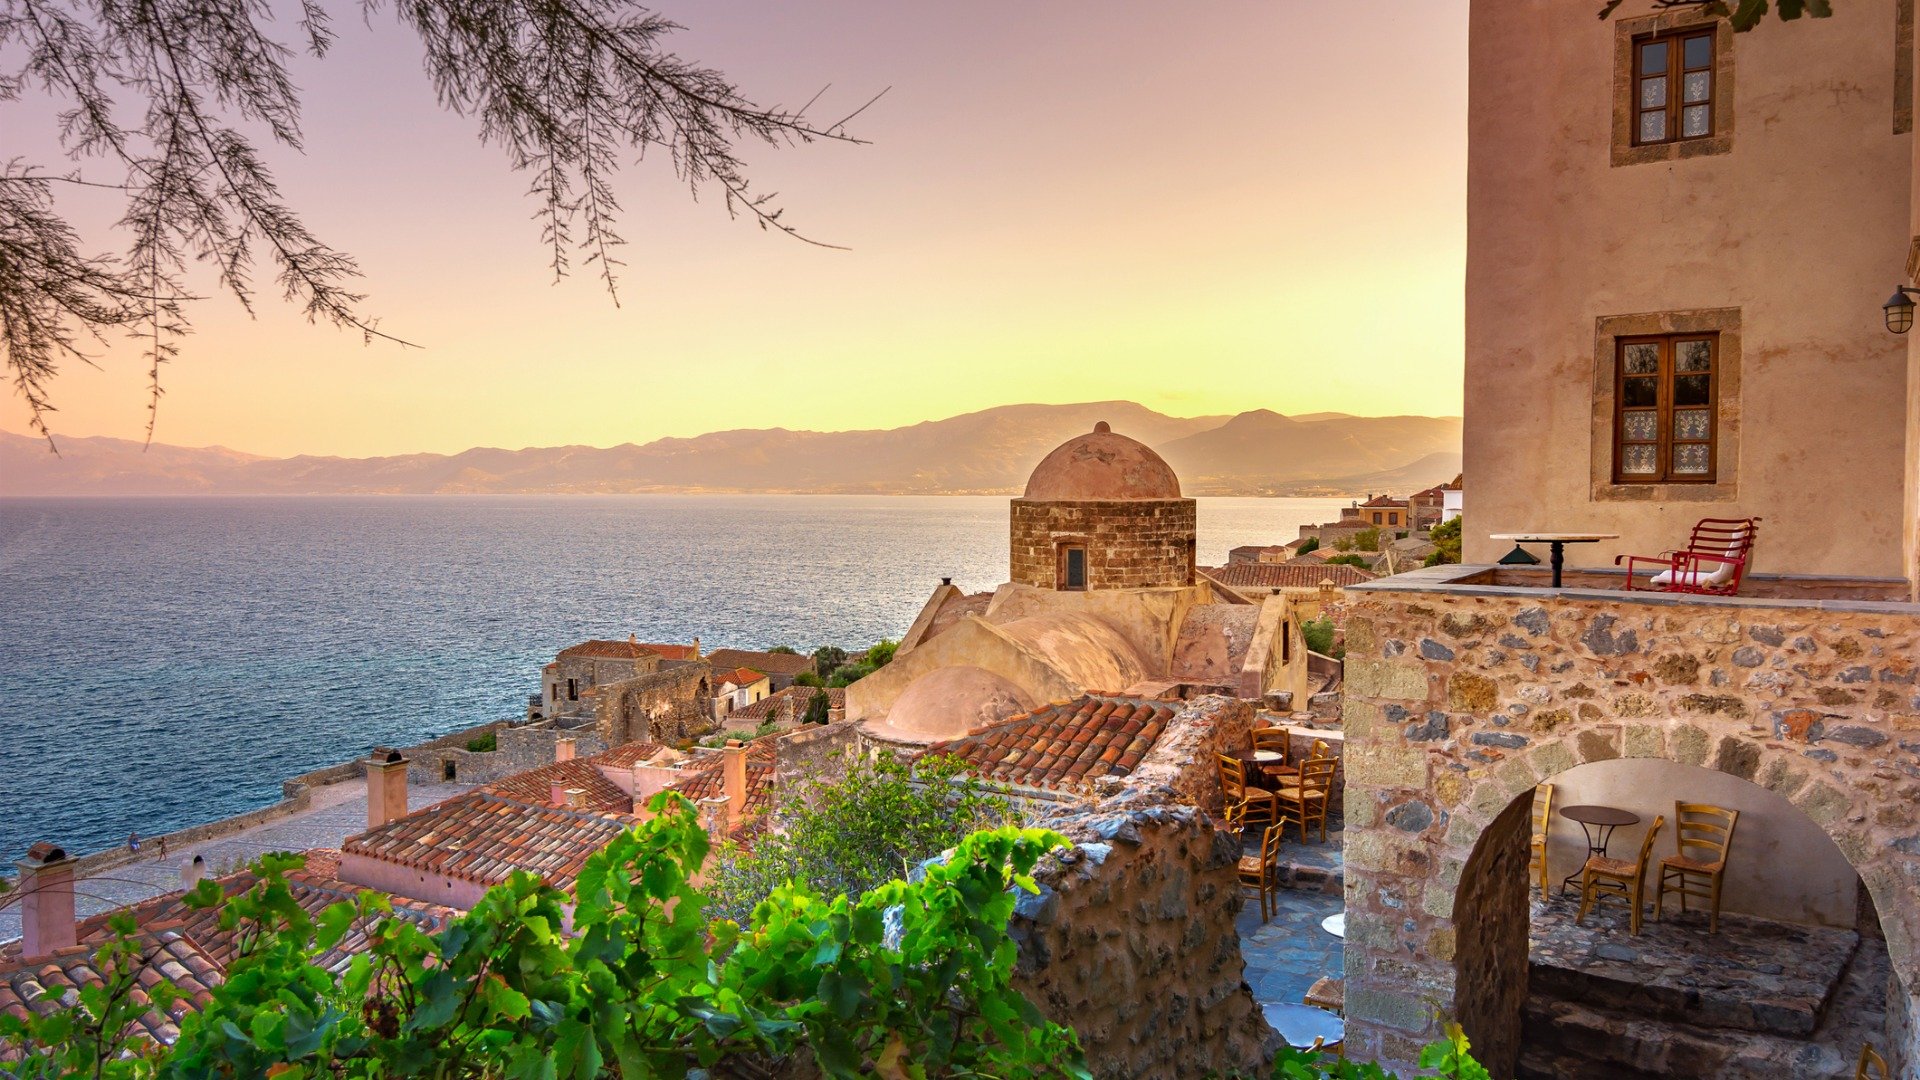 This is an image of the castle town of Monemvasia at sunset. 